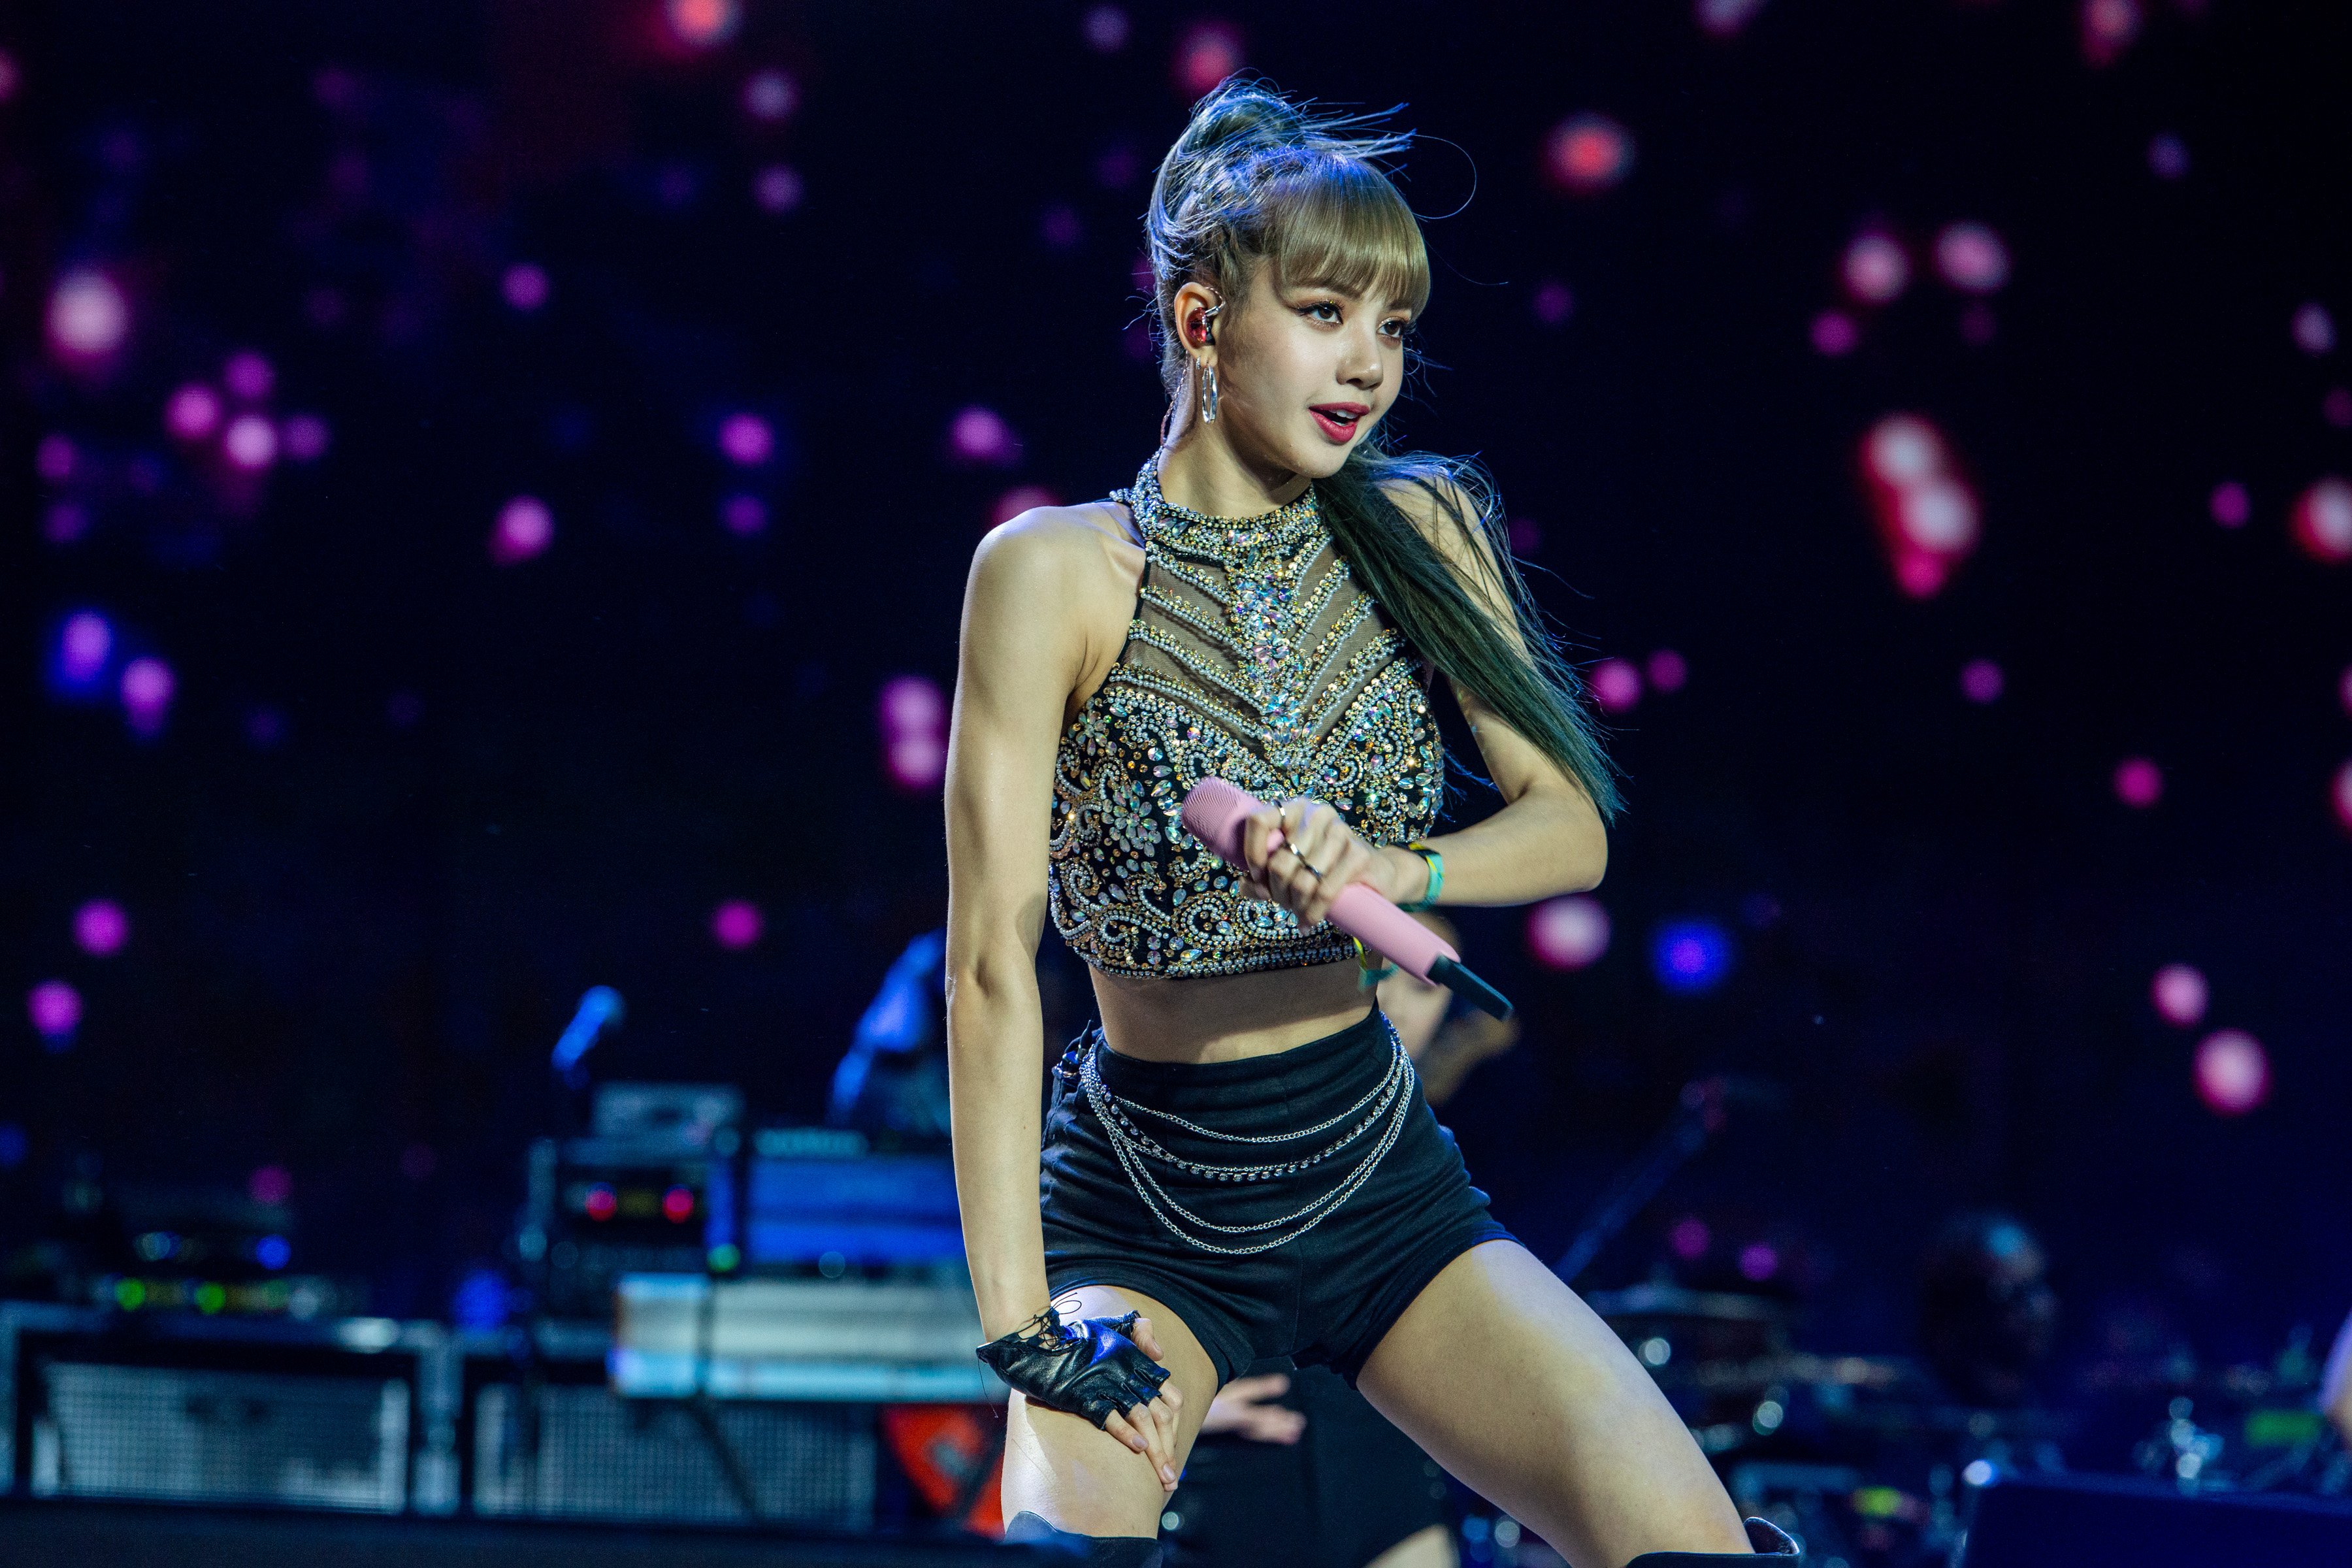 Lisa of BLACKPINK performs during 2019 Coachella Valley Music And Arts Festival